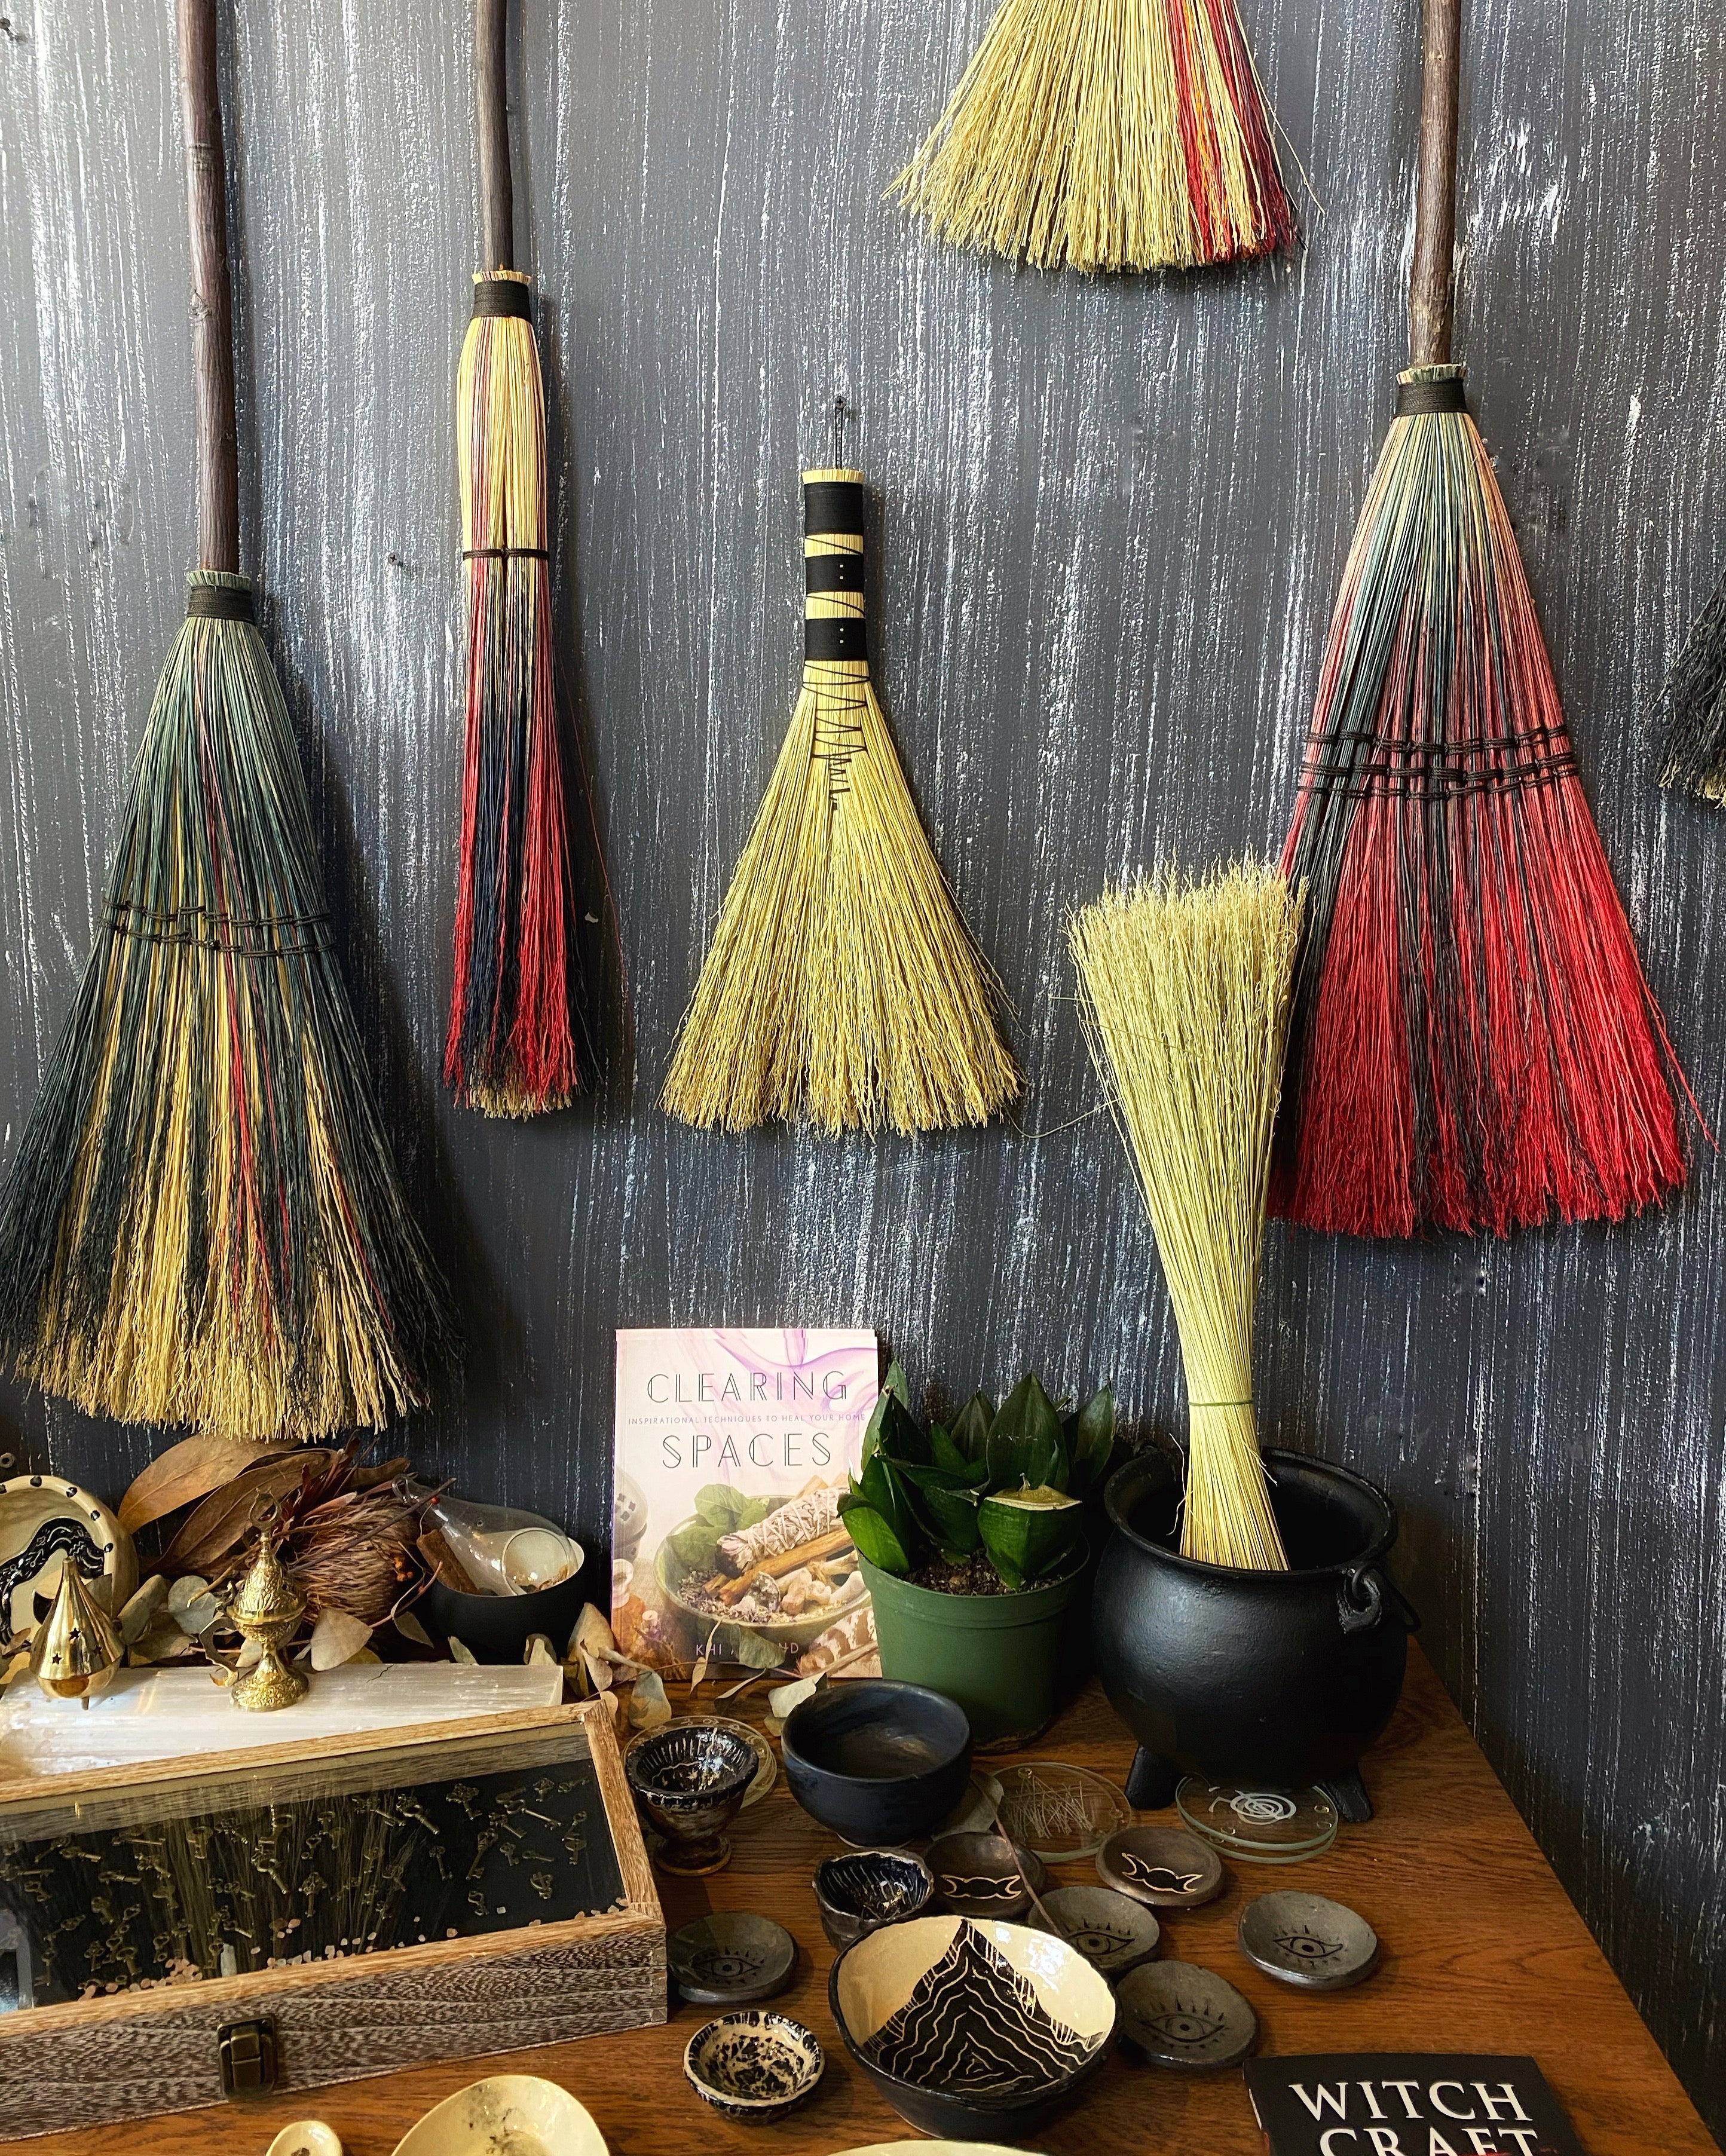 The Wrapped, Hand Wisk, Broom Making Workshop and Broom Kits - Online The House of Twigs Workshop - Keven Craft Rituals